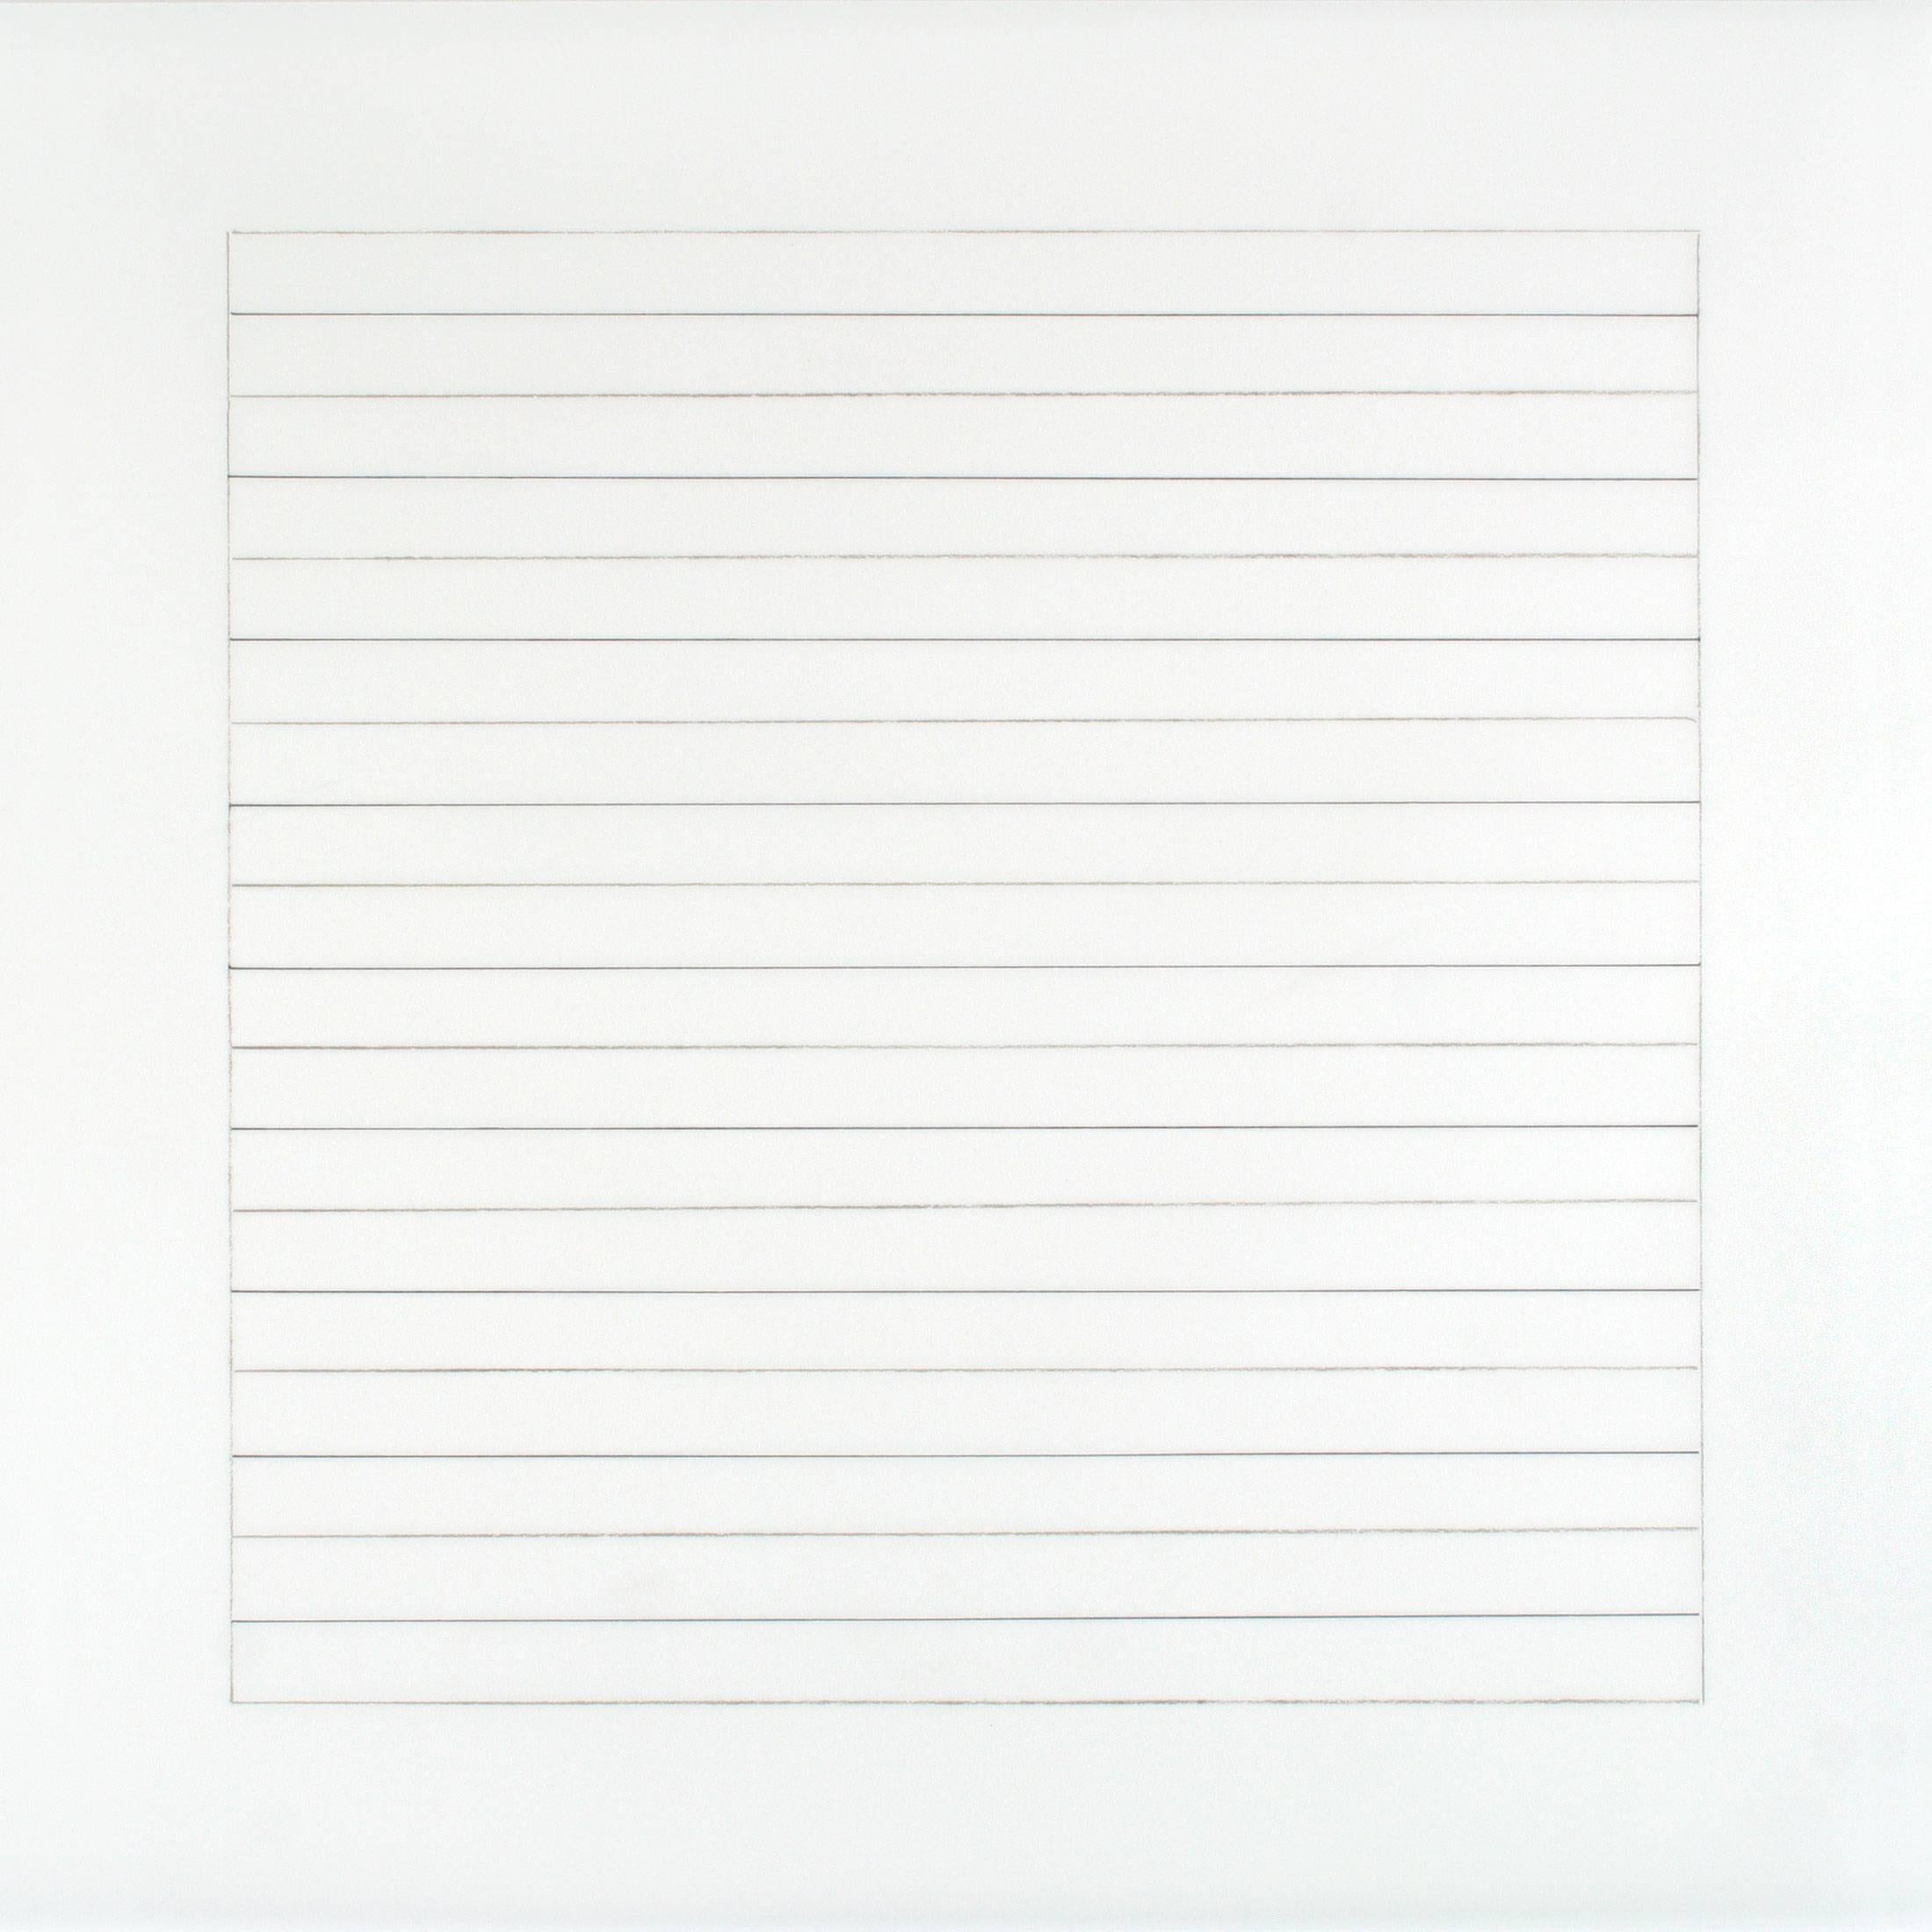 Amsterdam. Stedelijk Museum.  AGNES MARTIN. Paintings and Drawings 1974-1990. 160 pp.,  16 color and 55 b&w illus. with a suite of ten loose prints laid-in the slipcase, as issued. Large 4to, wraps in slipcase. 1992.
A handsome exhibition catalogue